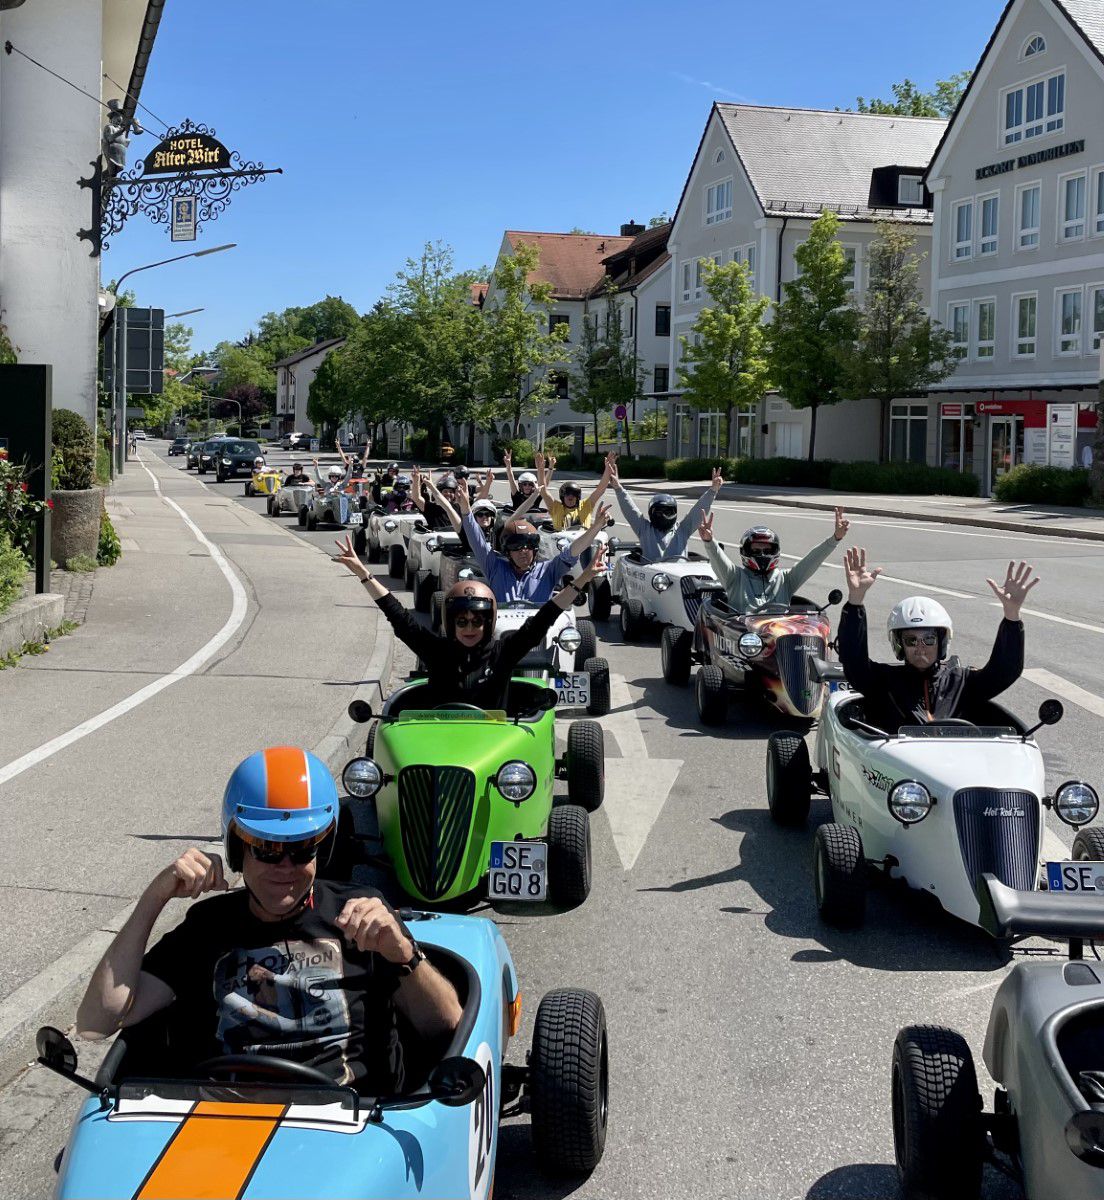 Hot rod drivers in go karts driving in a row on the streets of Munich, passing the old landlord